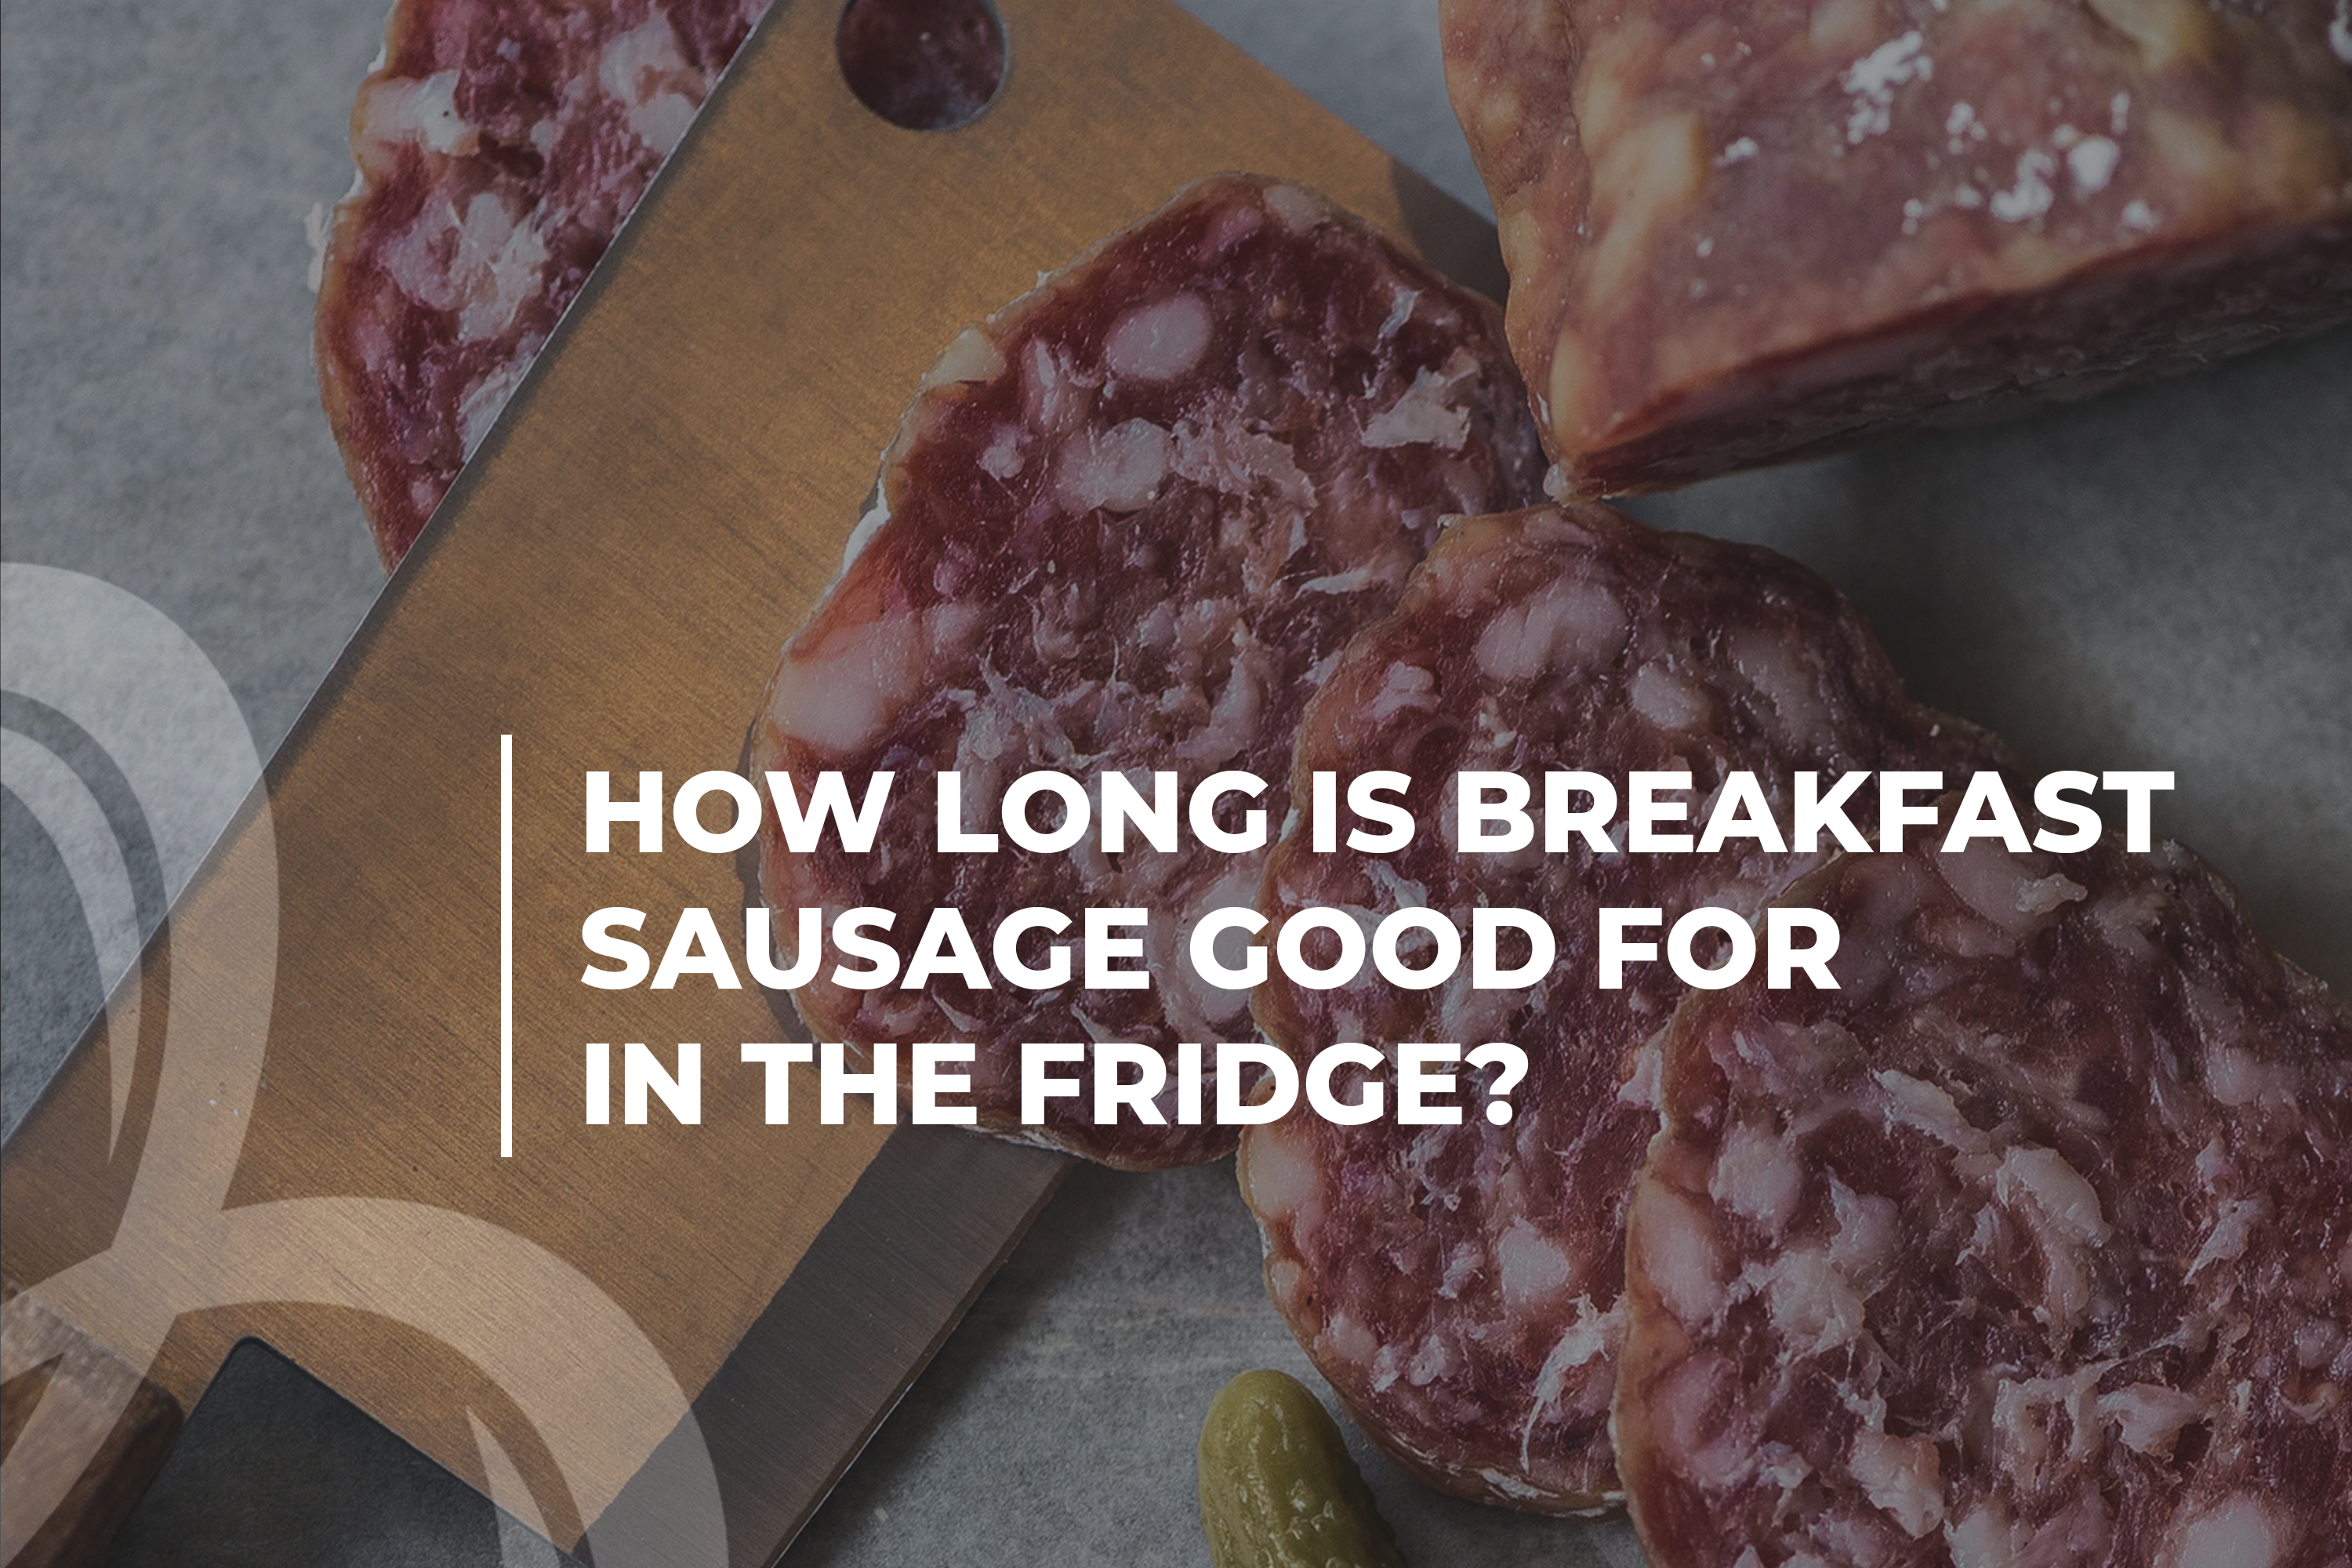 How long is breakfast sausage good for in the fridge